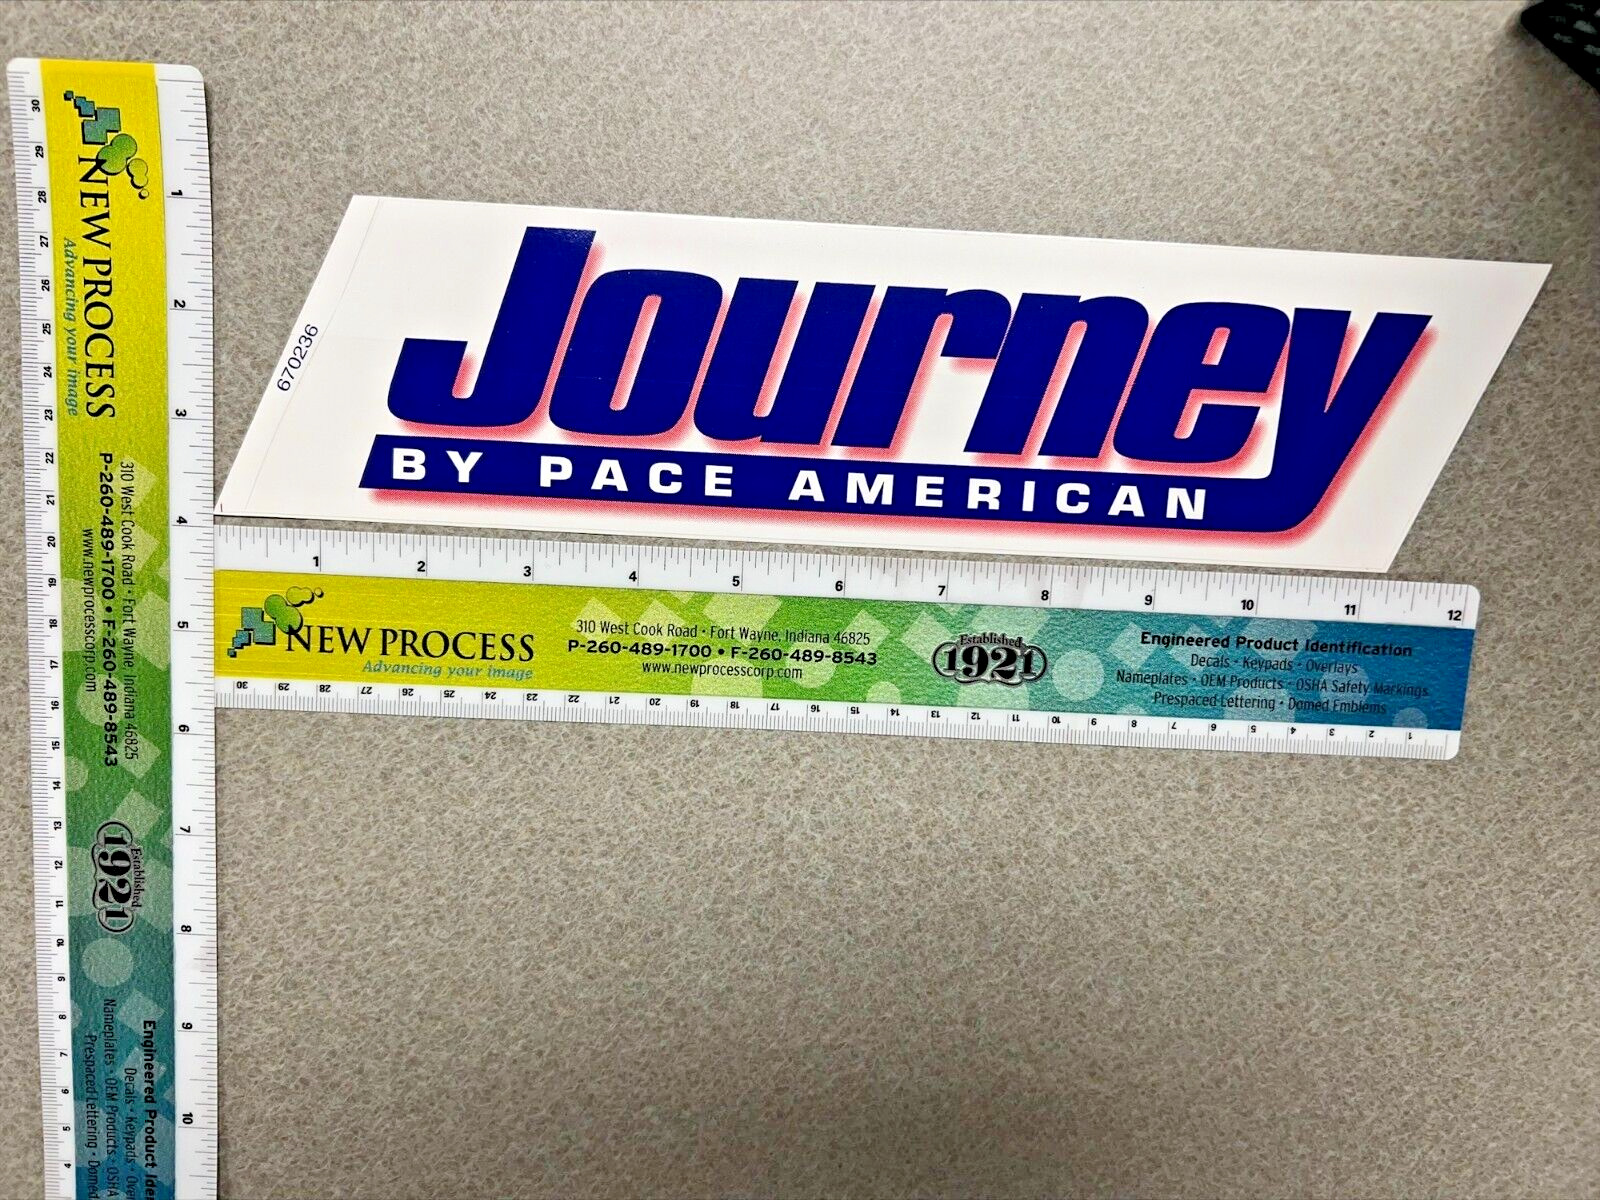 Pace Trailer - Journey by Pace American Logo - Part #670236 (from OEM supplier)